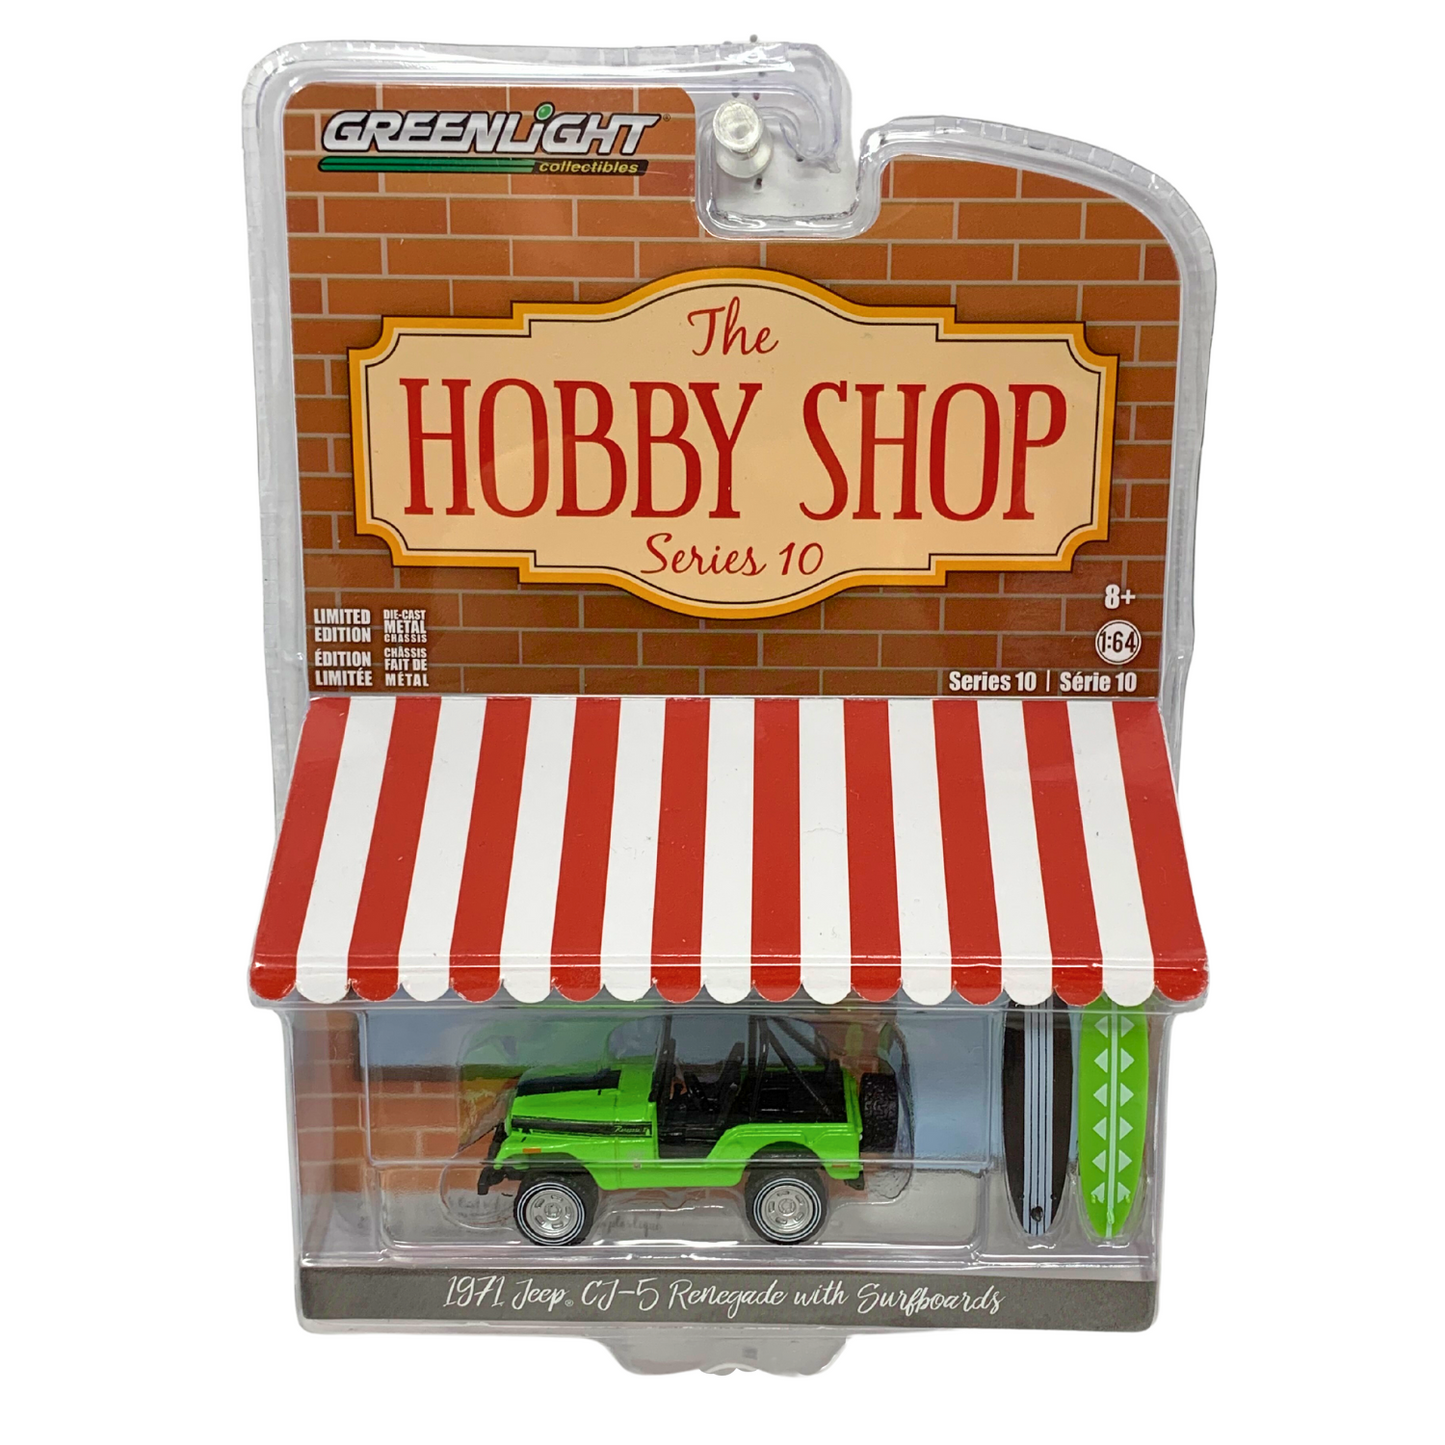 Greenlight 1971 Jeep CJ-5 Renegade with Surfboard The Hobby Shop 1:64 Diecast